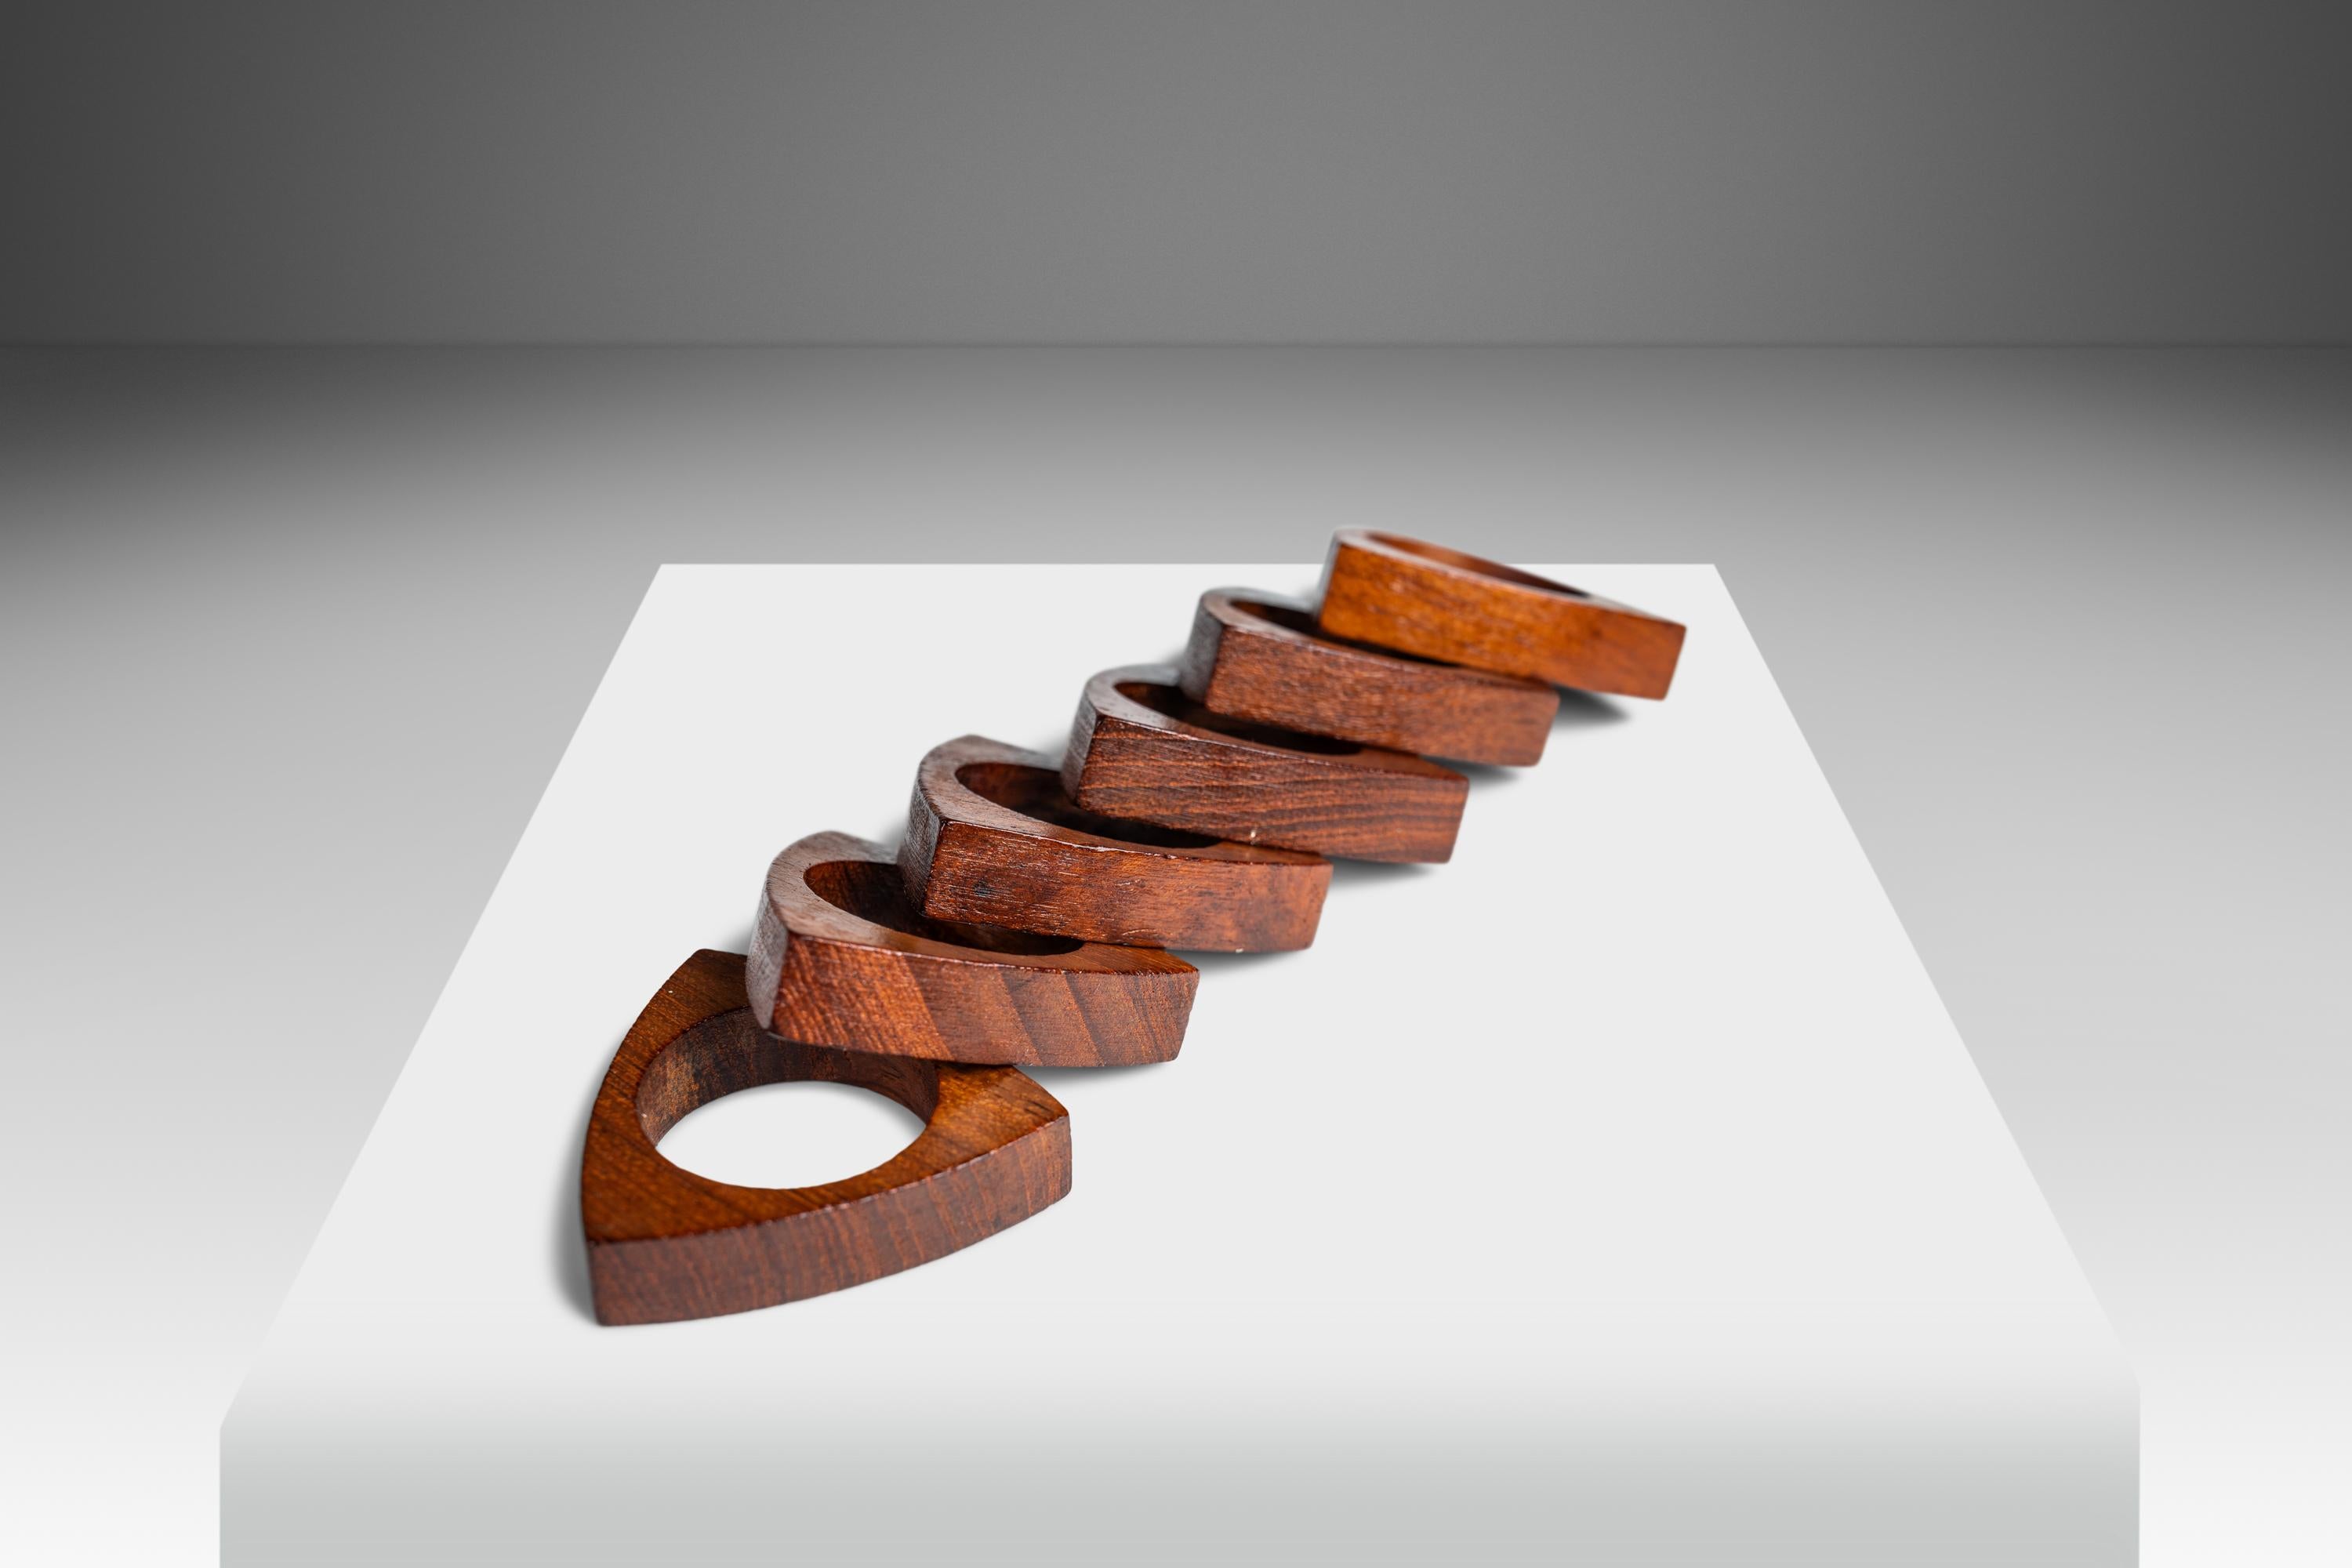 Set of Six Mid-Century Modern Napkin Rings in Solid Teak, Denmark, c. 1960's In Good Condition For Sale In Deland, FL